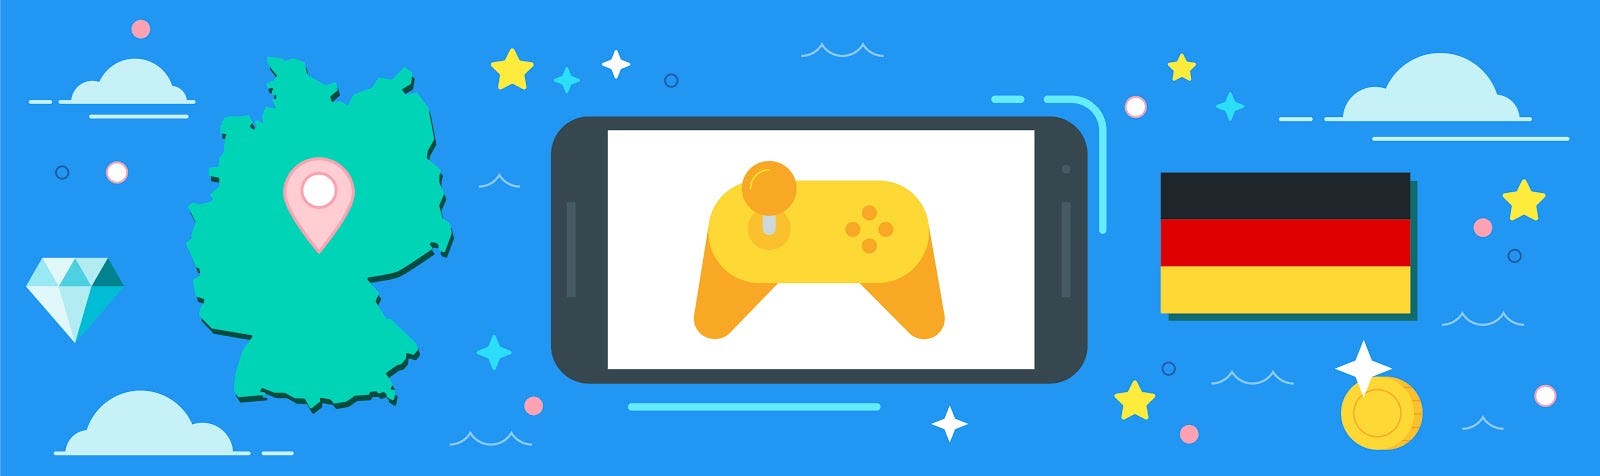 Google Play Store sports 18 new categories for games - Android